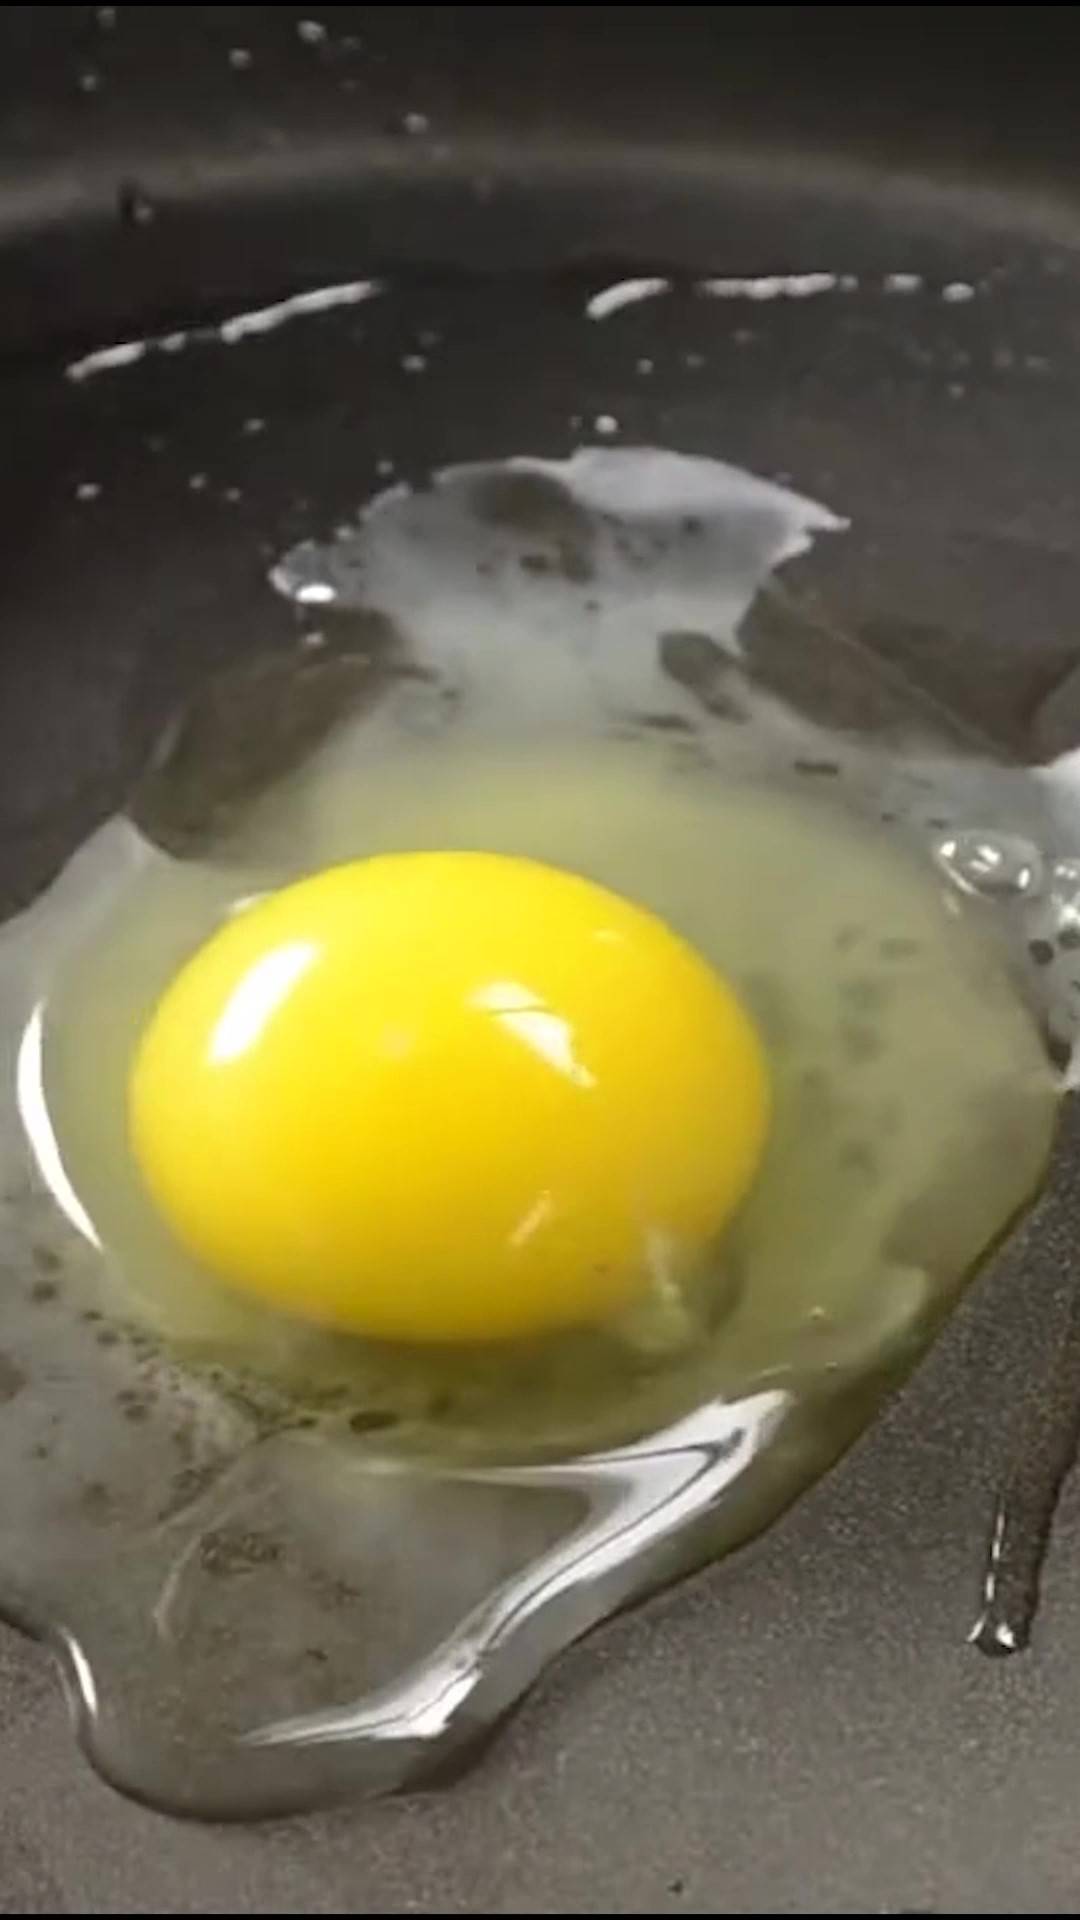 Egg cracked onto a non-stick greased skillet.